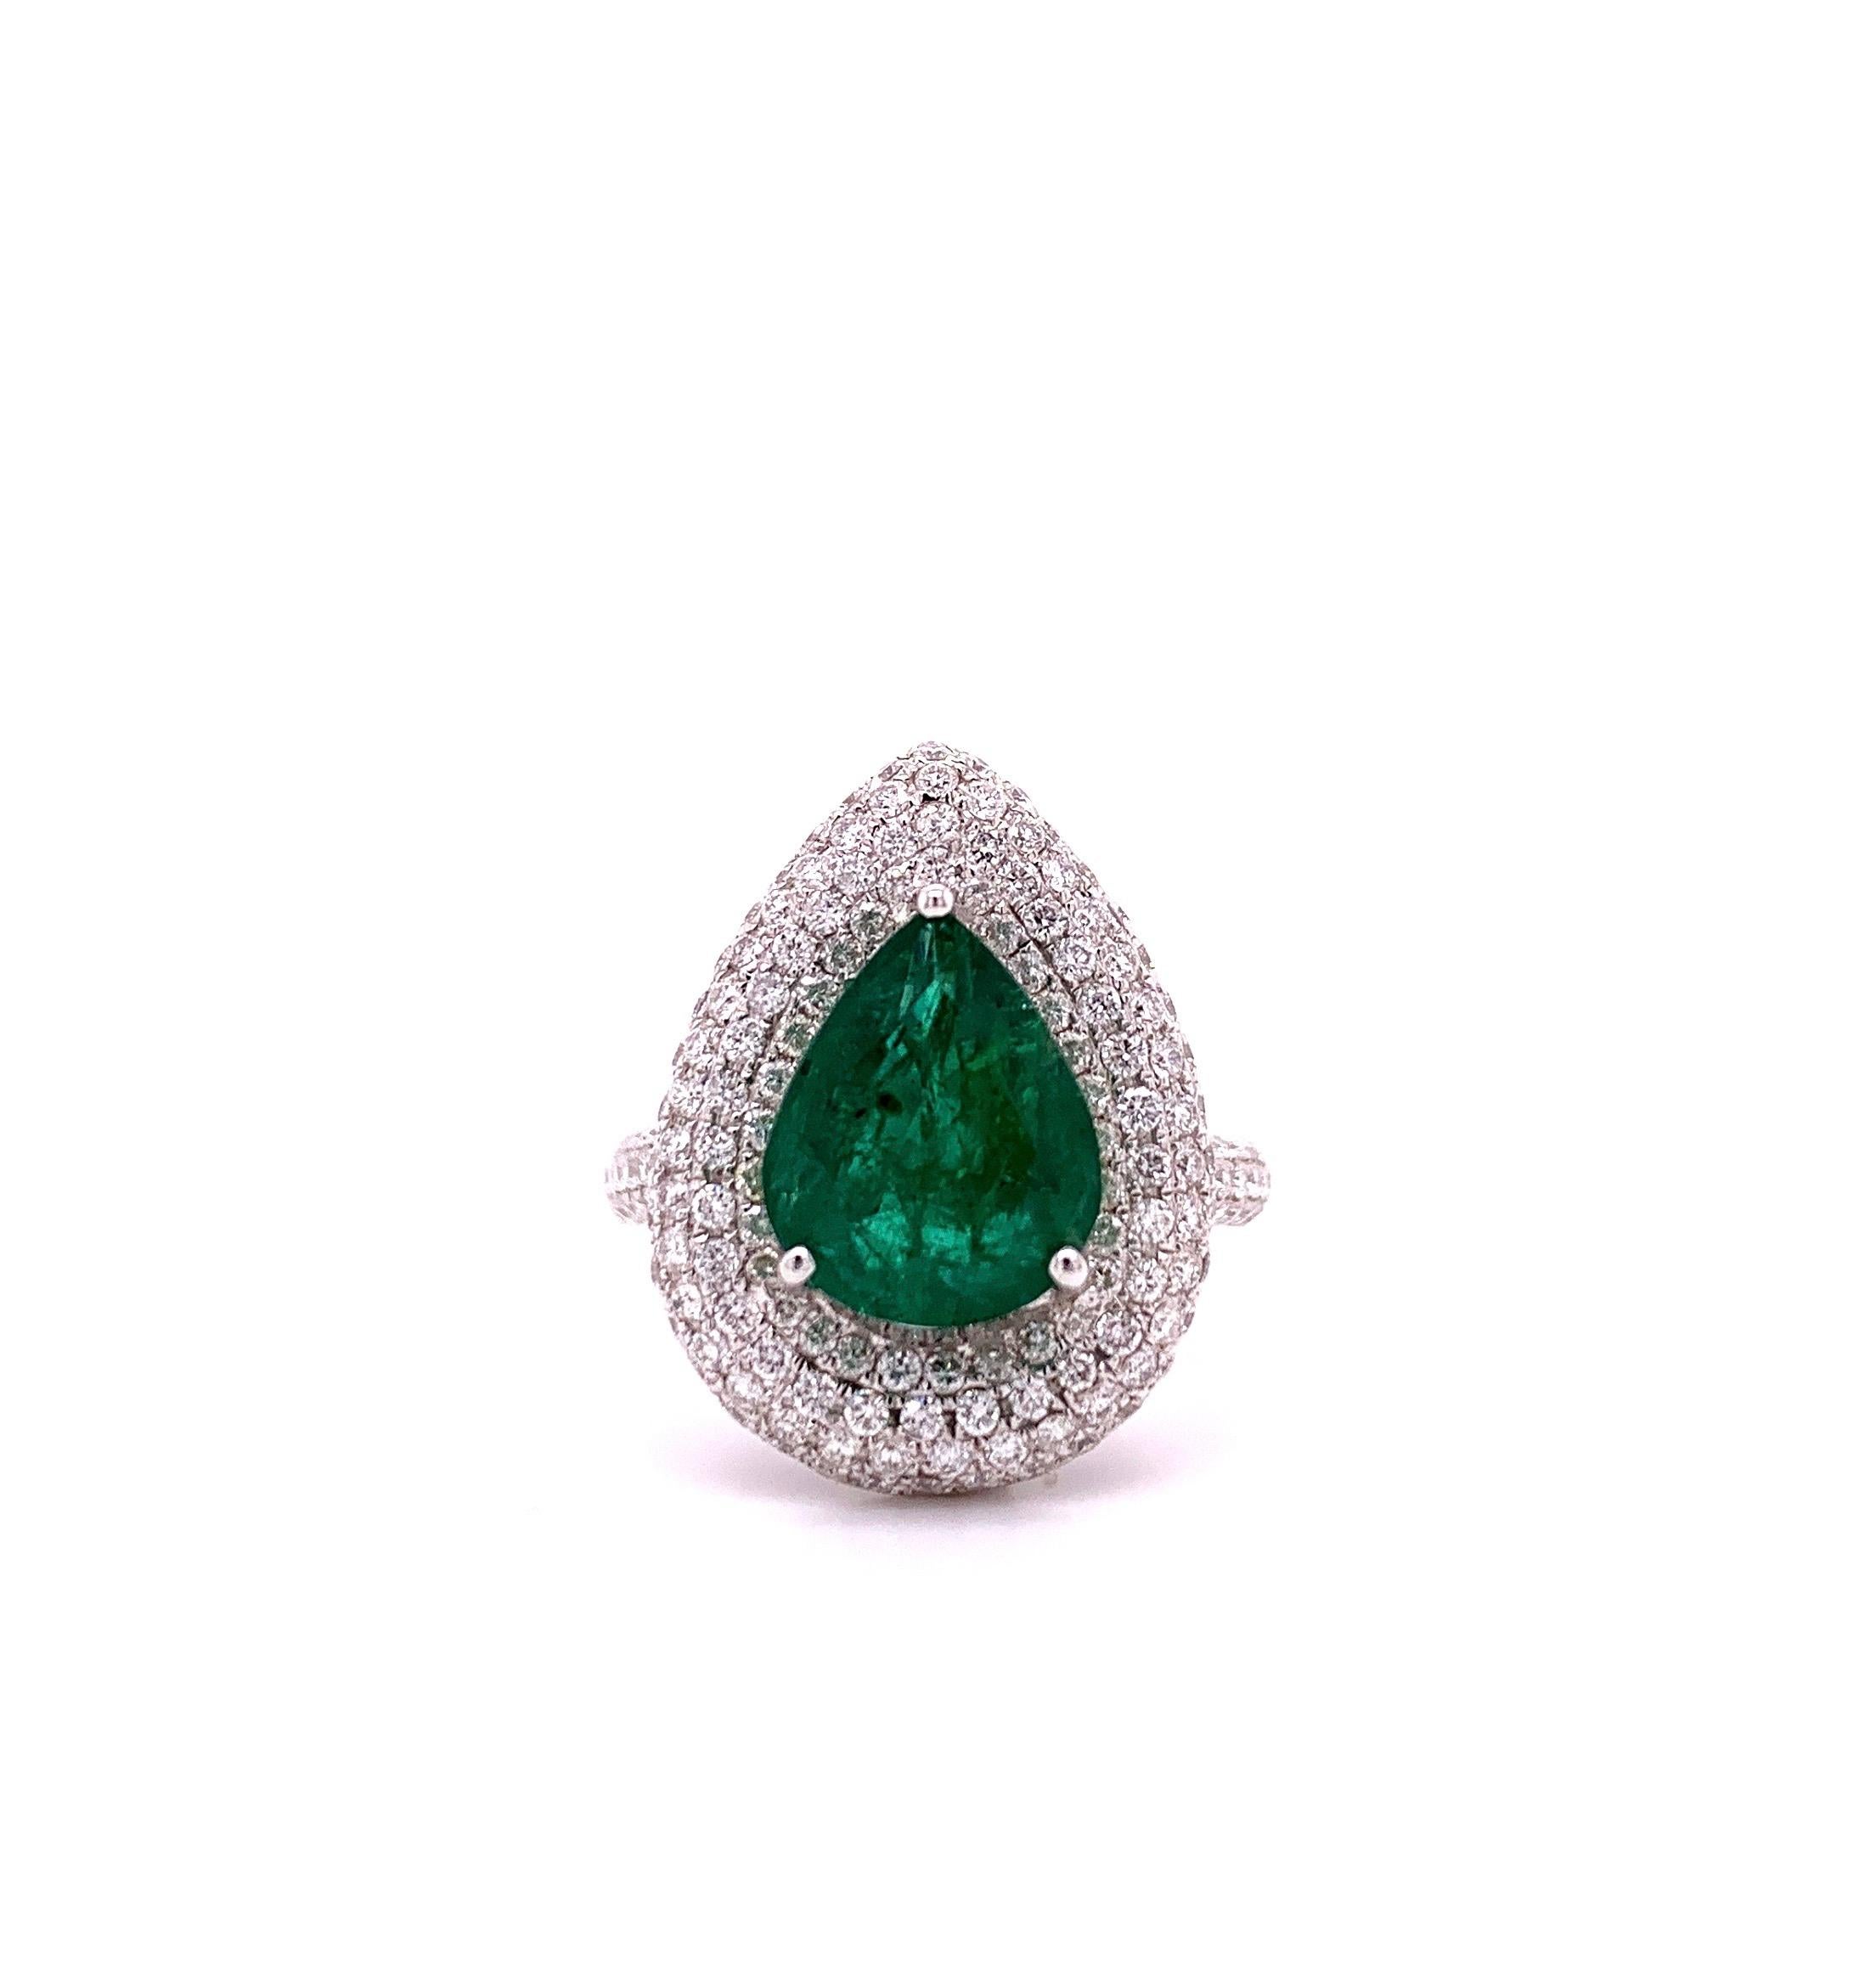 Stunning emerald diamond cocktail ring. Lively intense green with lustre, pear faceted, 3.19 carats natural emerald encased in open basket mount with three bead prongs, framed with a round brilliant cut diamond cluster, along with diamond cluster on